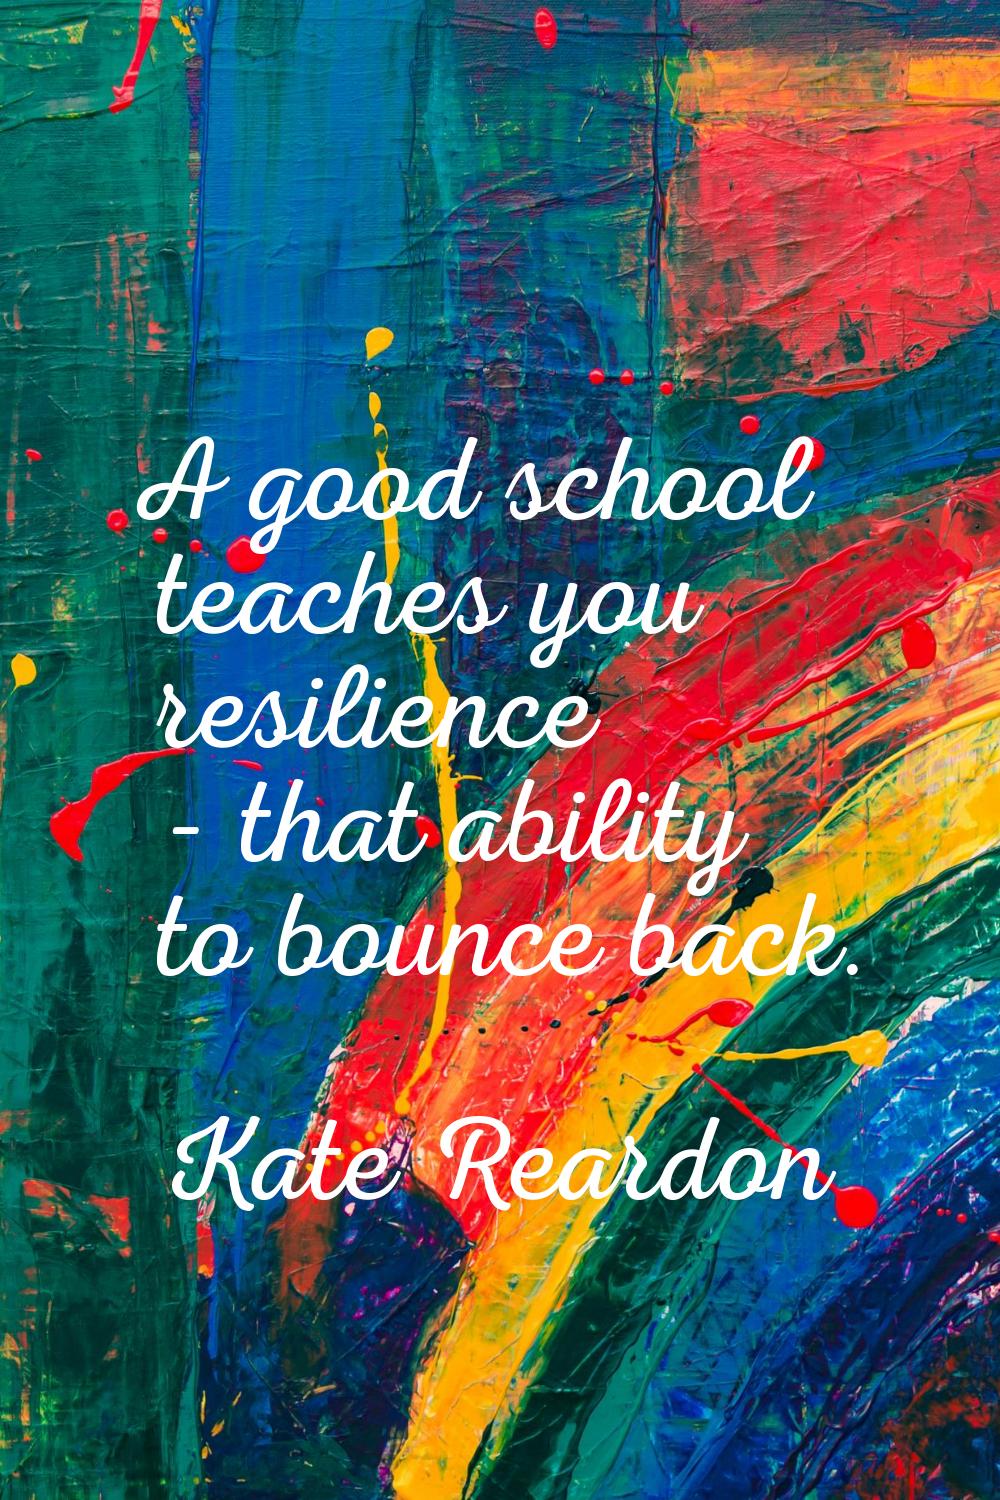 A good school teaches you resilience - that ability to bounce back.